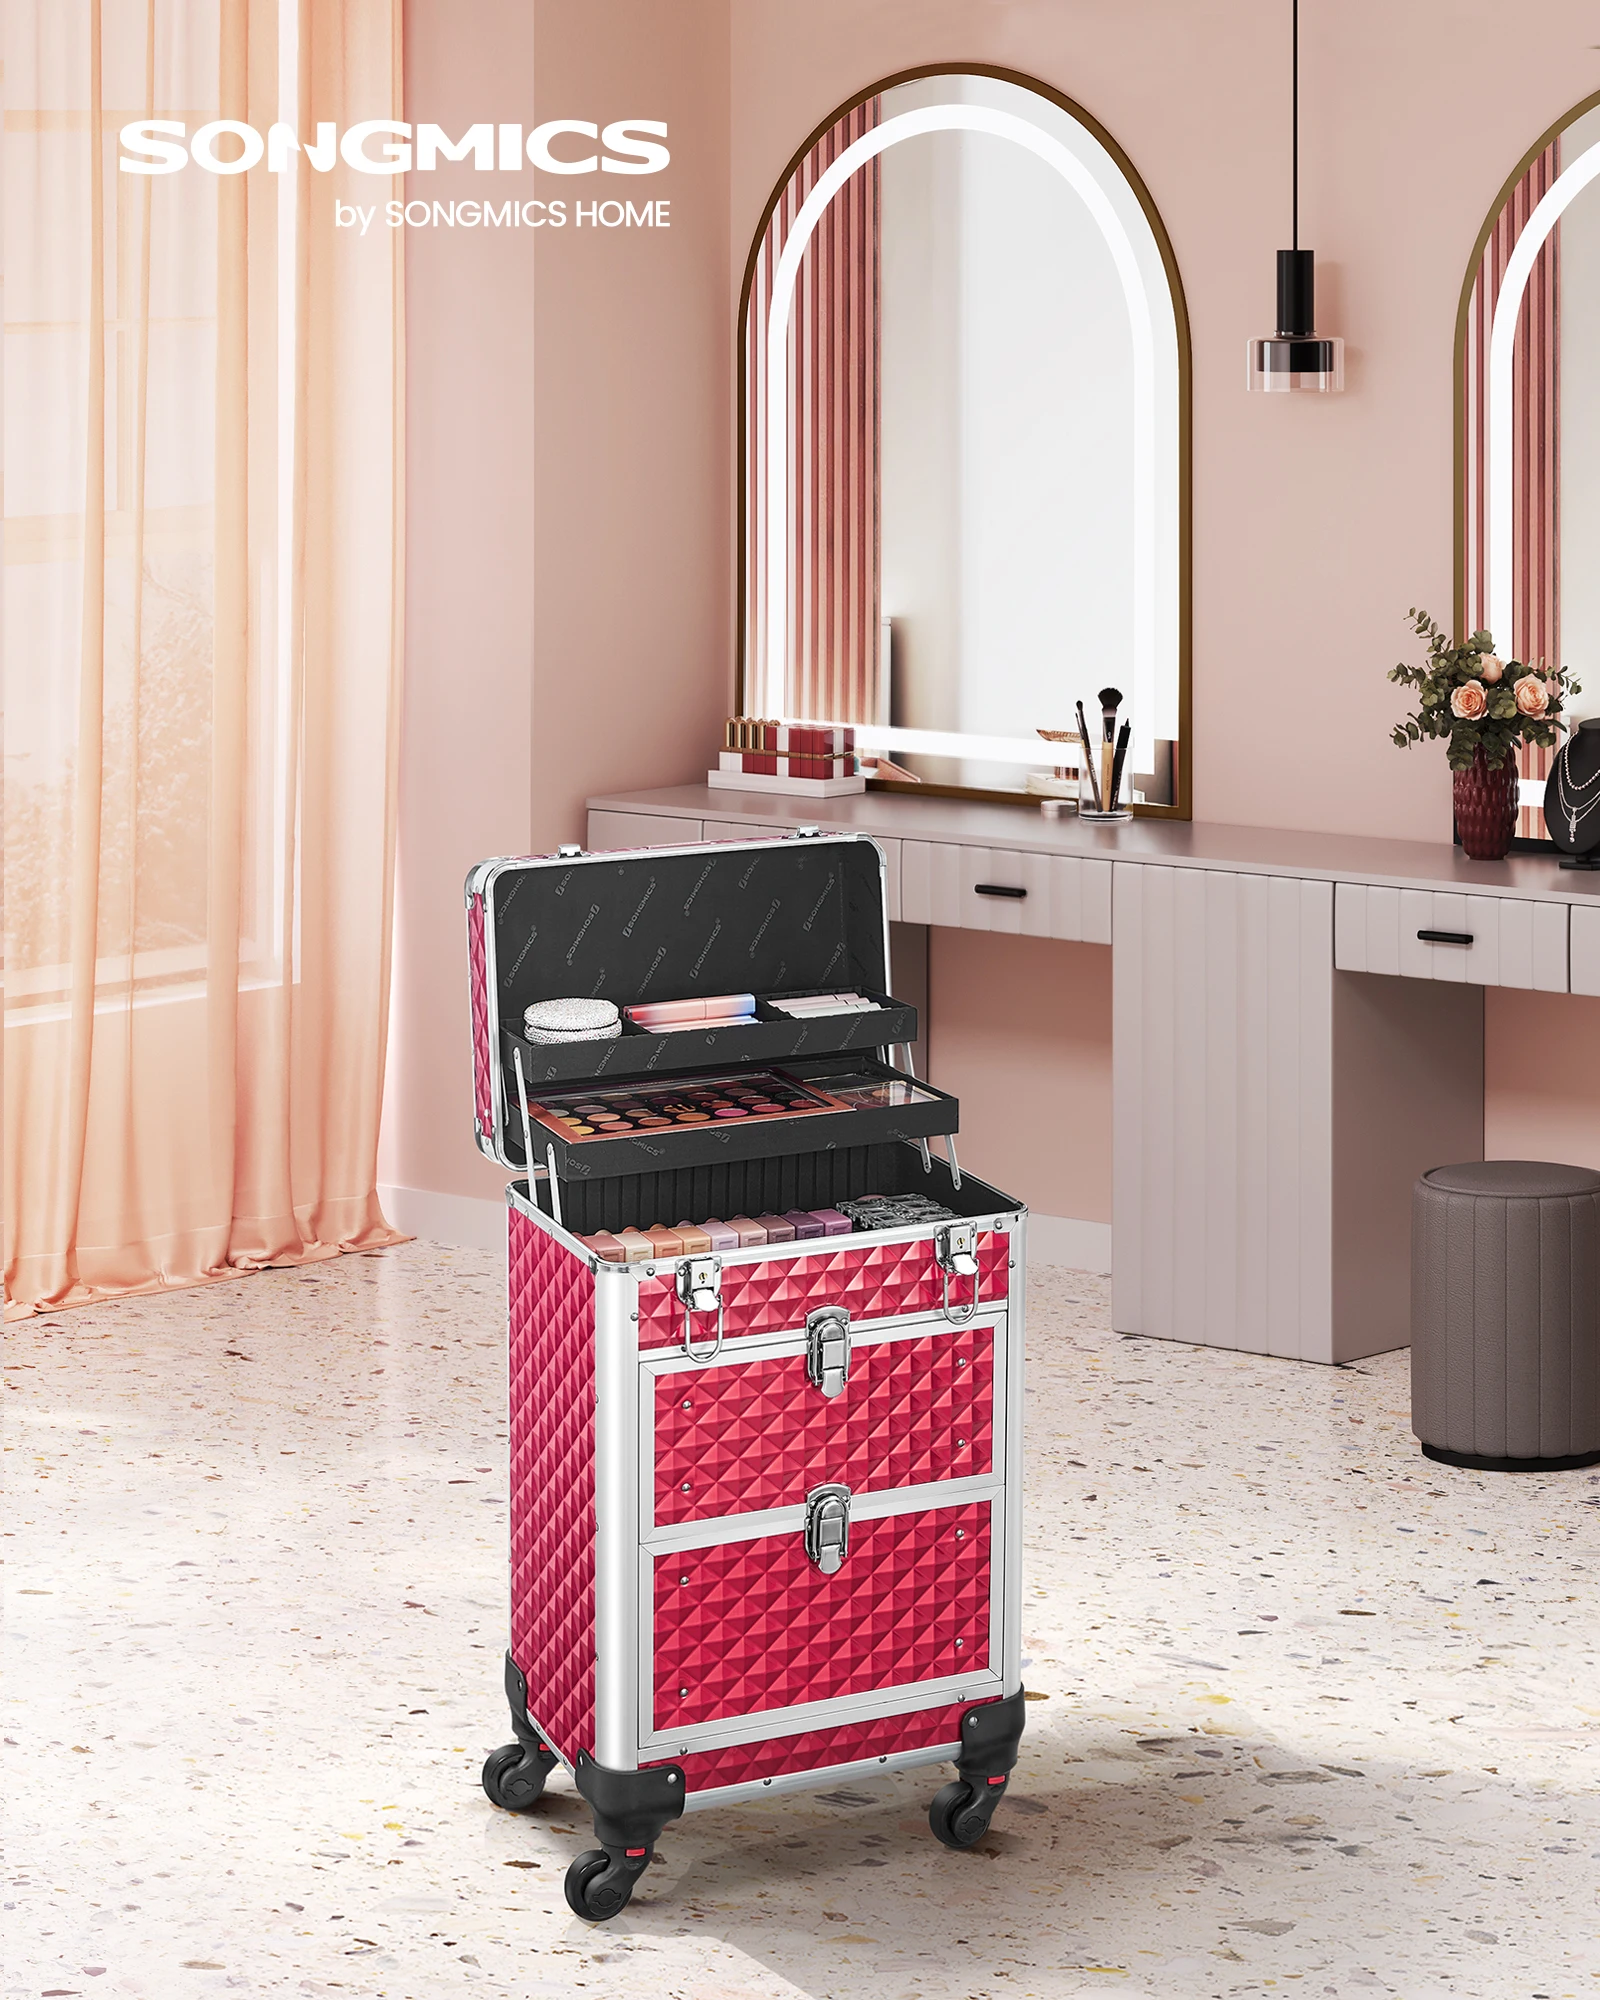 SOMGMICS Wholesale Aluminum Trolley Makeup Organizer 3 in 1 Cosmetic travel Case rolling makeup case